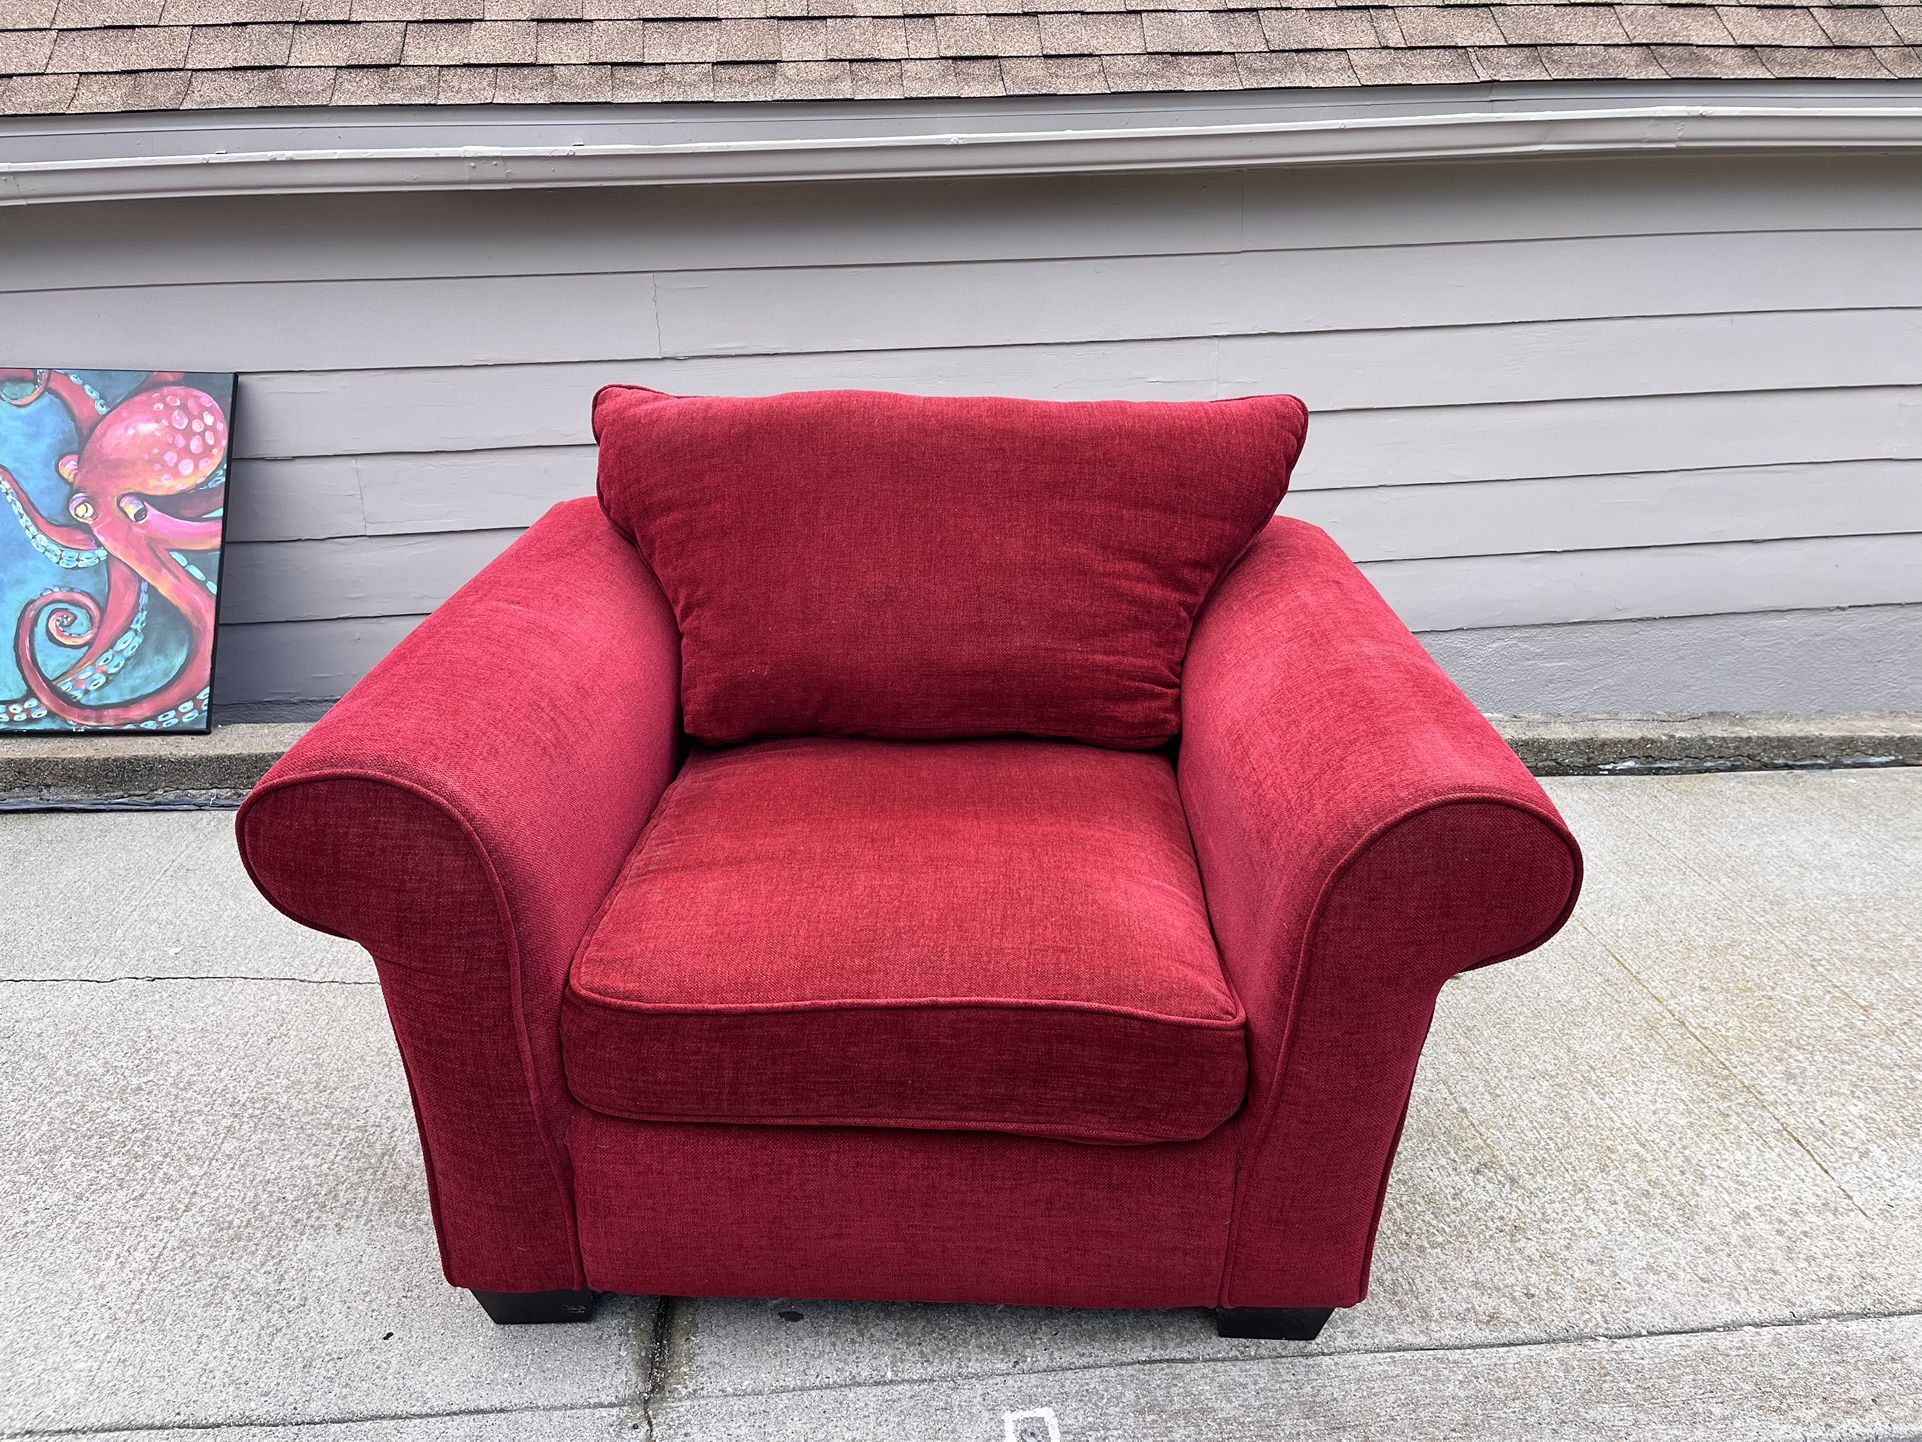 FREE Red Lounge Chair